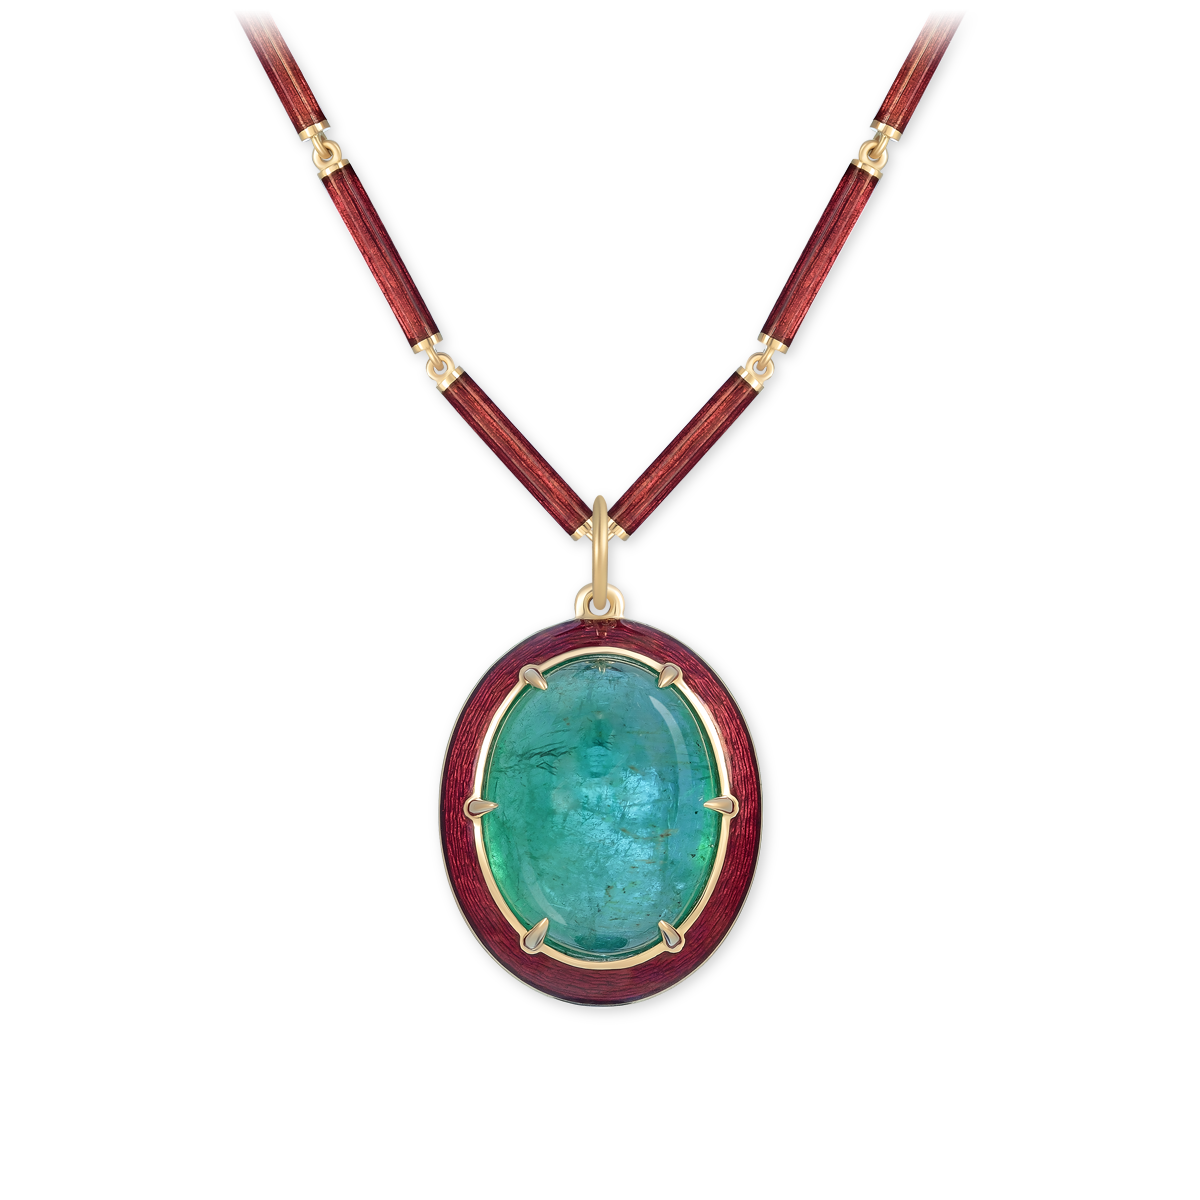 Pendant with emerald from the Samarkand collection